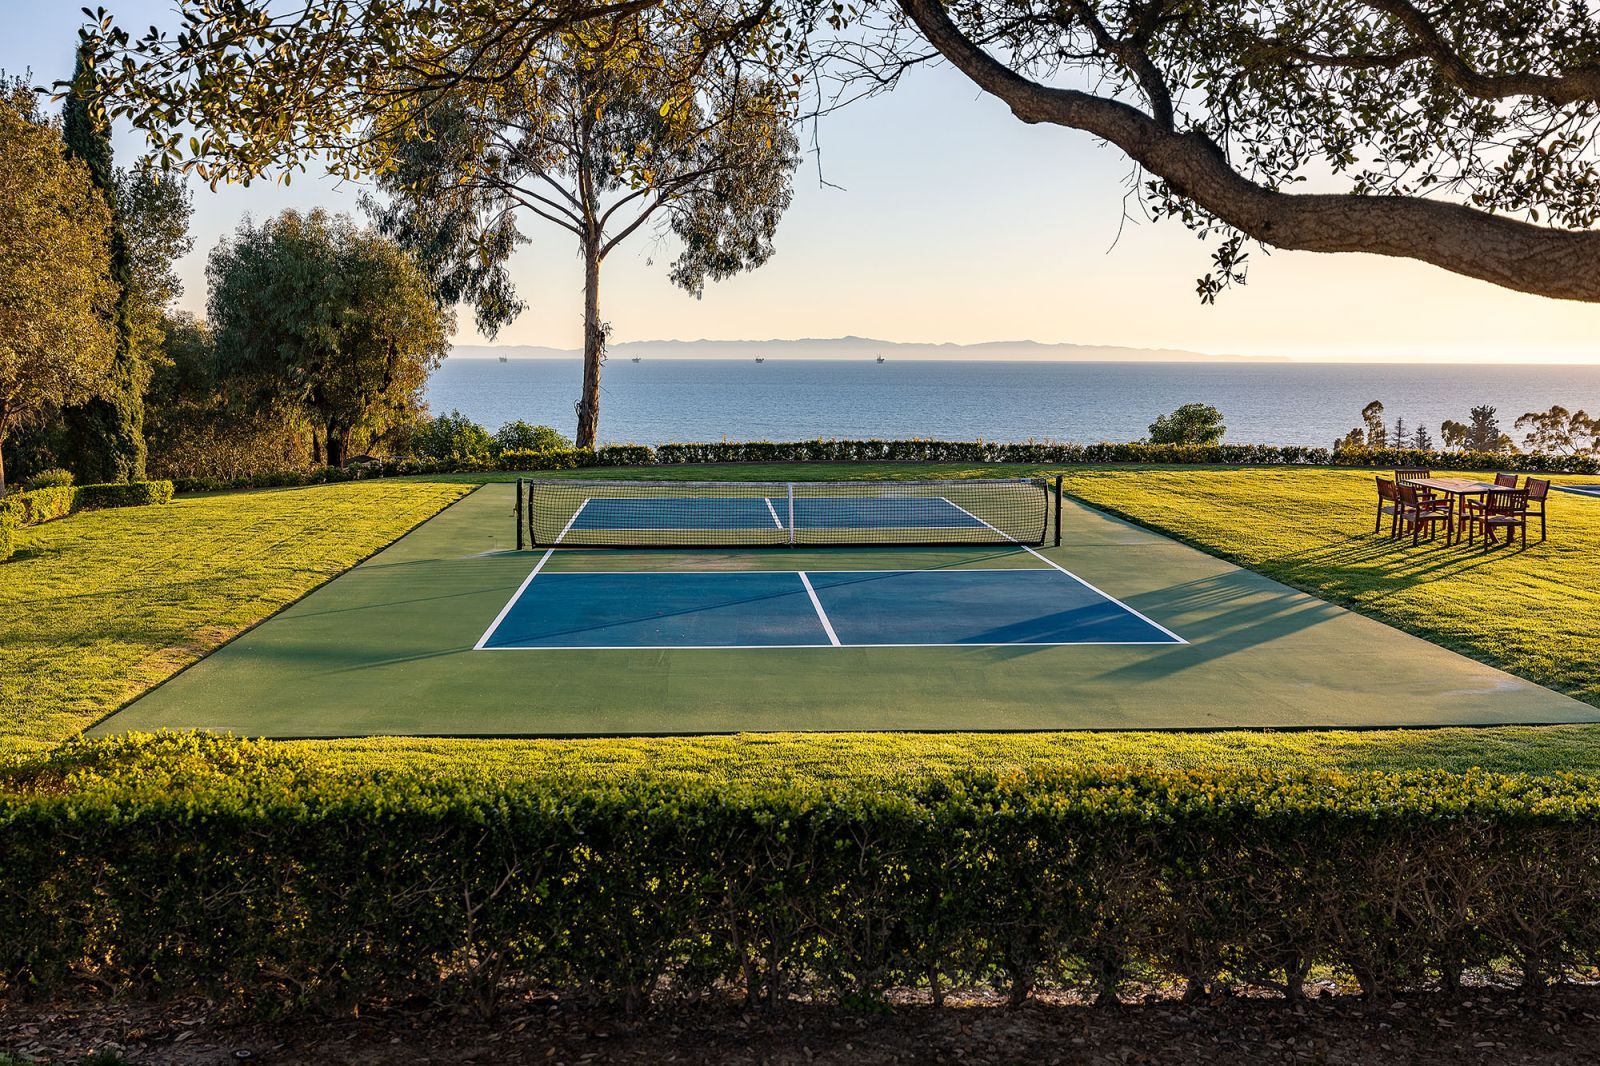 The verdant grounds of an estate, looking toward a pickleball court surrounded by verdant lawn, with the blue ocean in the background